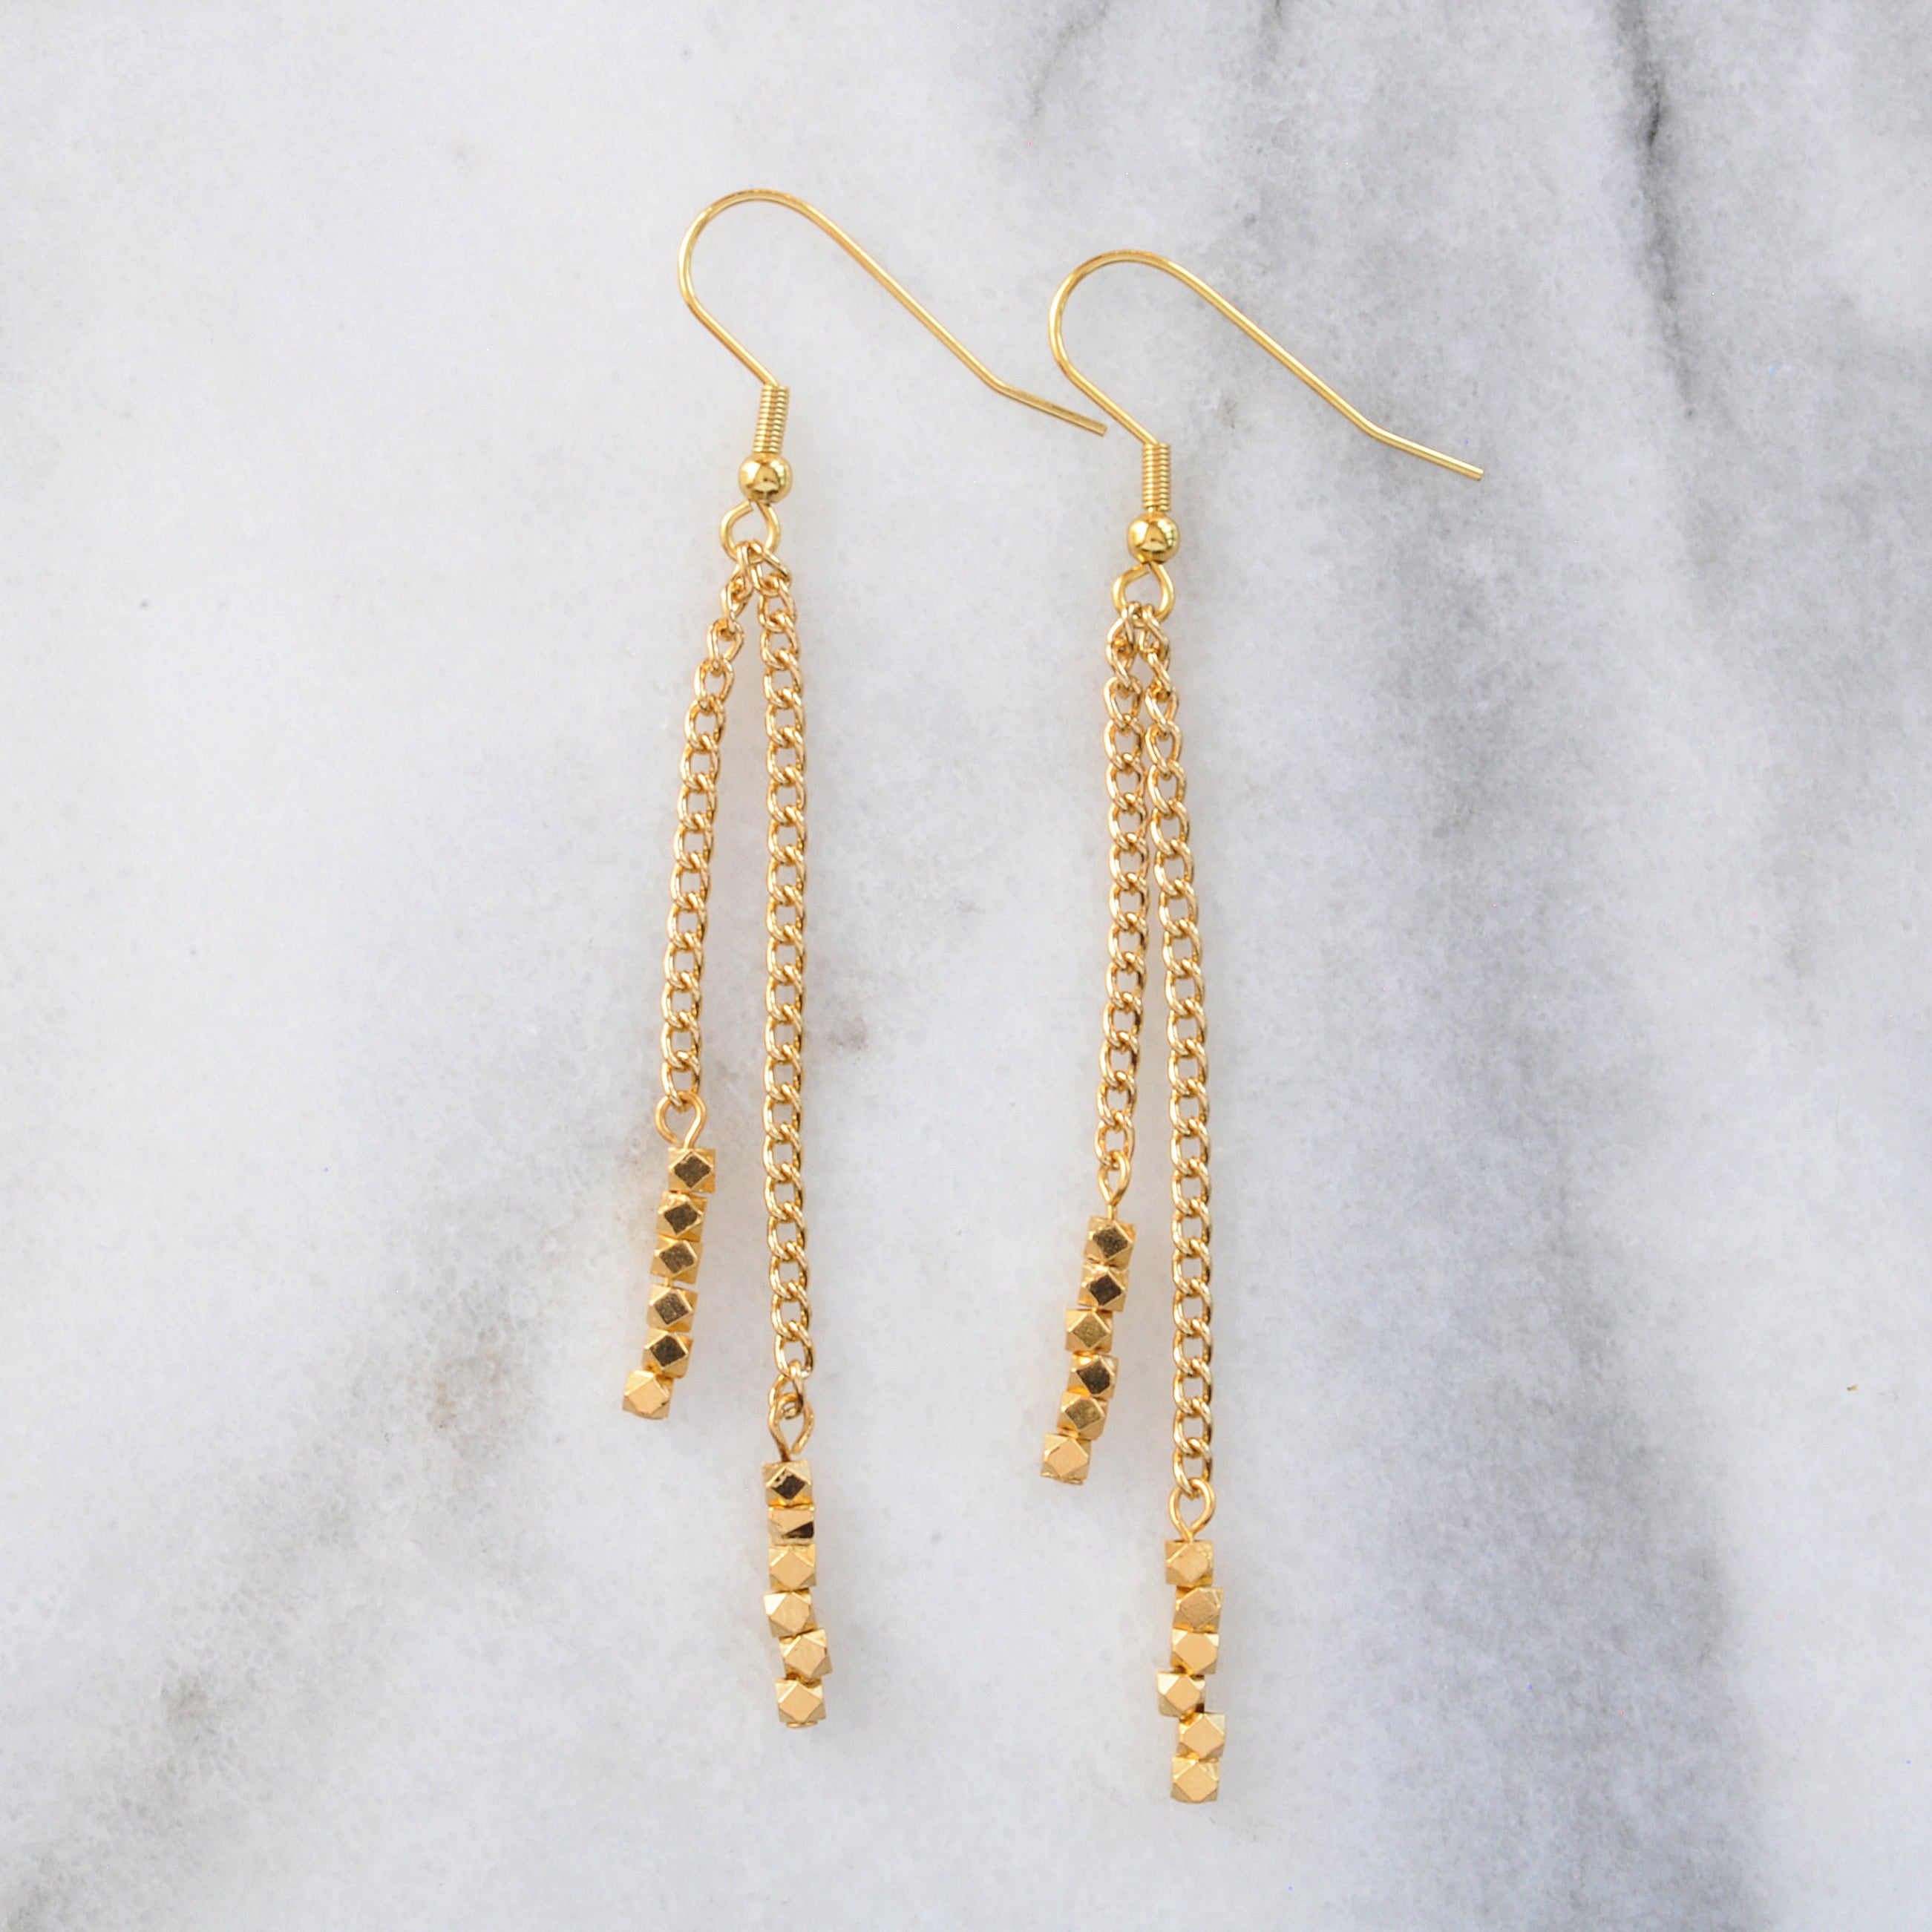 Libby & Smee Gemstone Gold chain Earrings available with gold beads